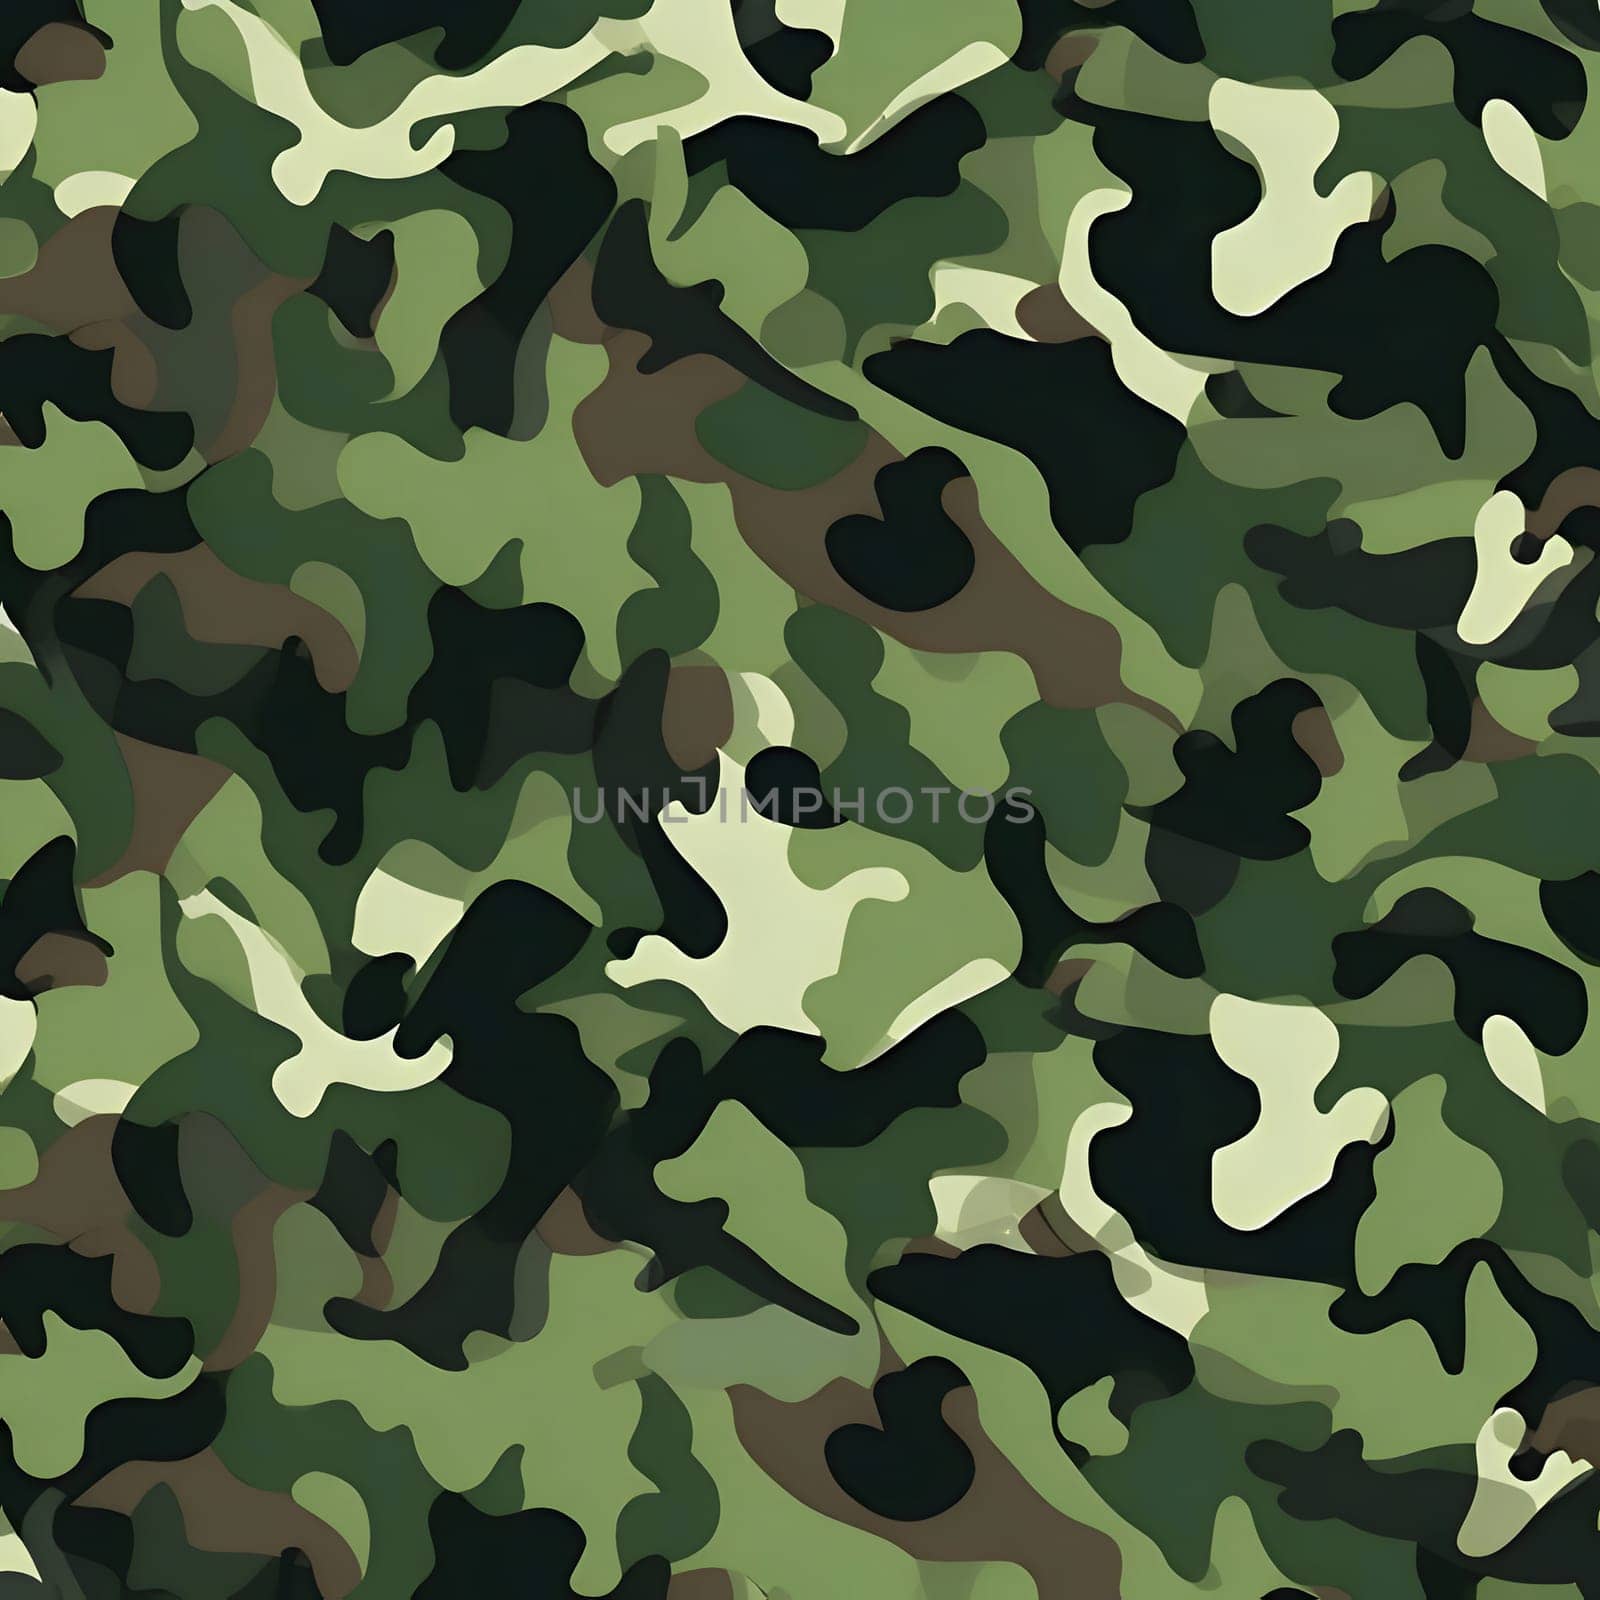 Patterns and banners backgrounds: Camouflage pattern. Seamless background. Vector illustration.